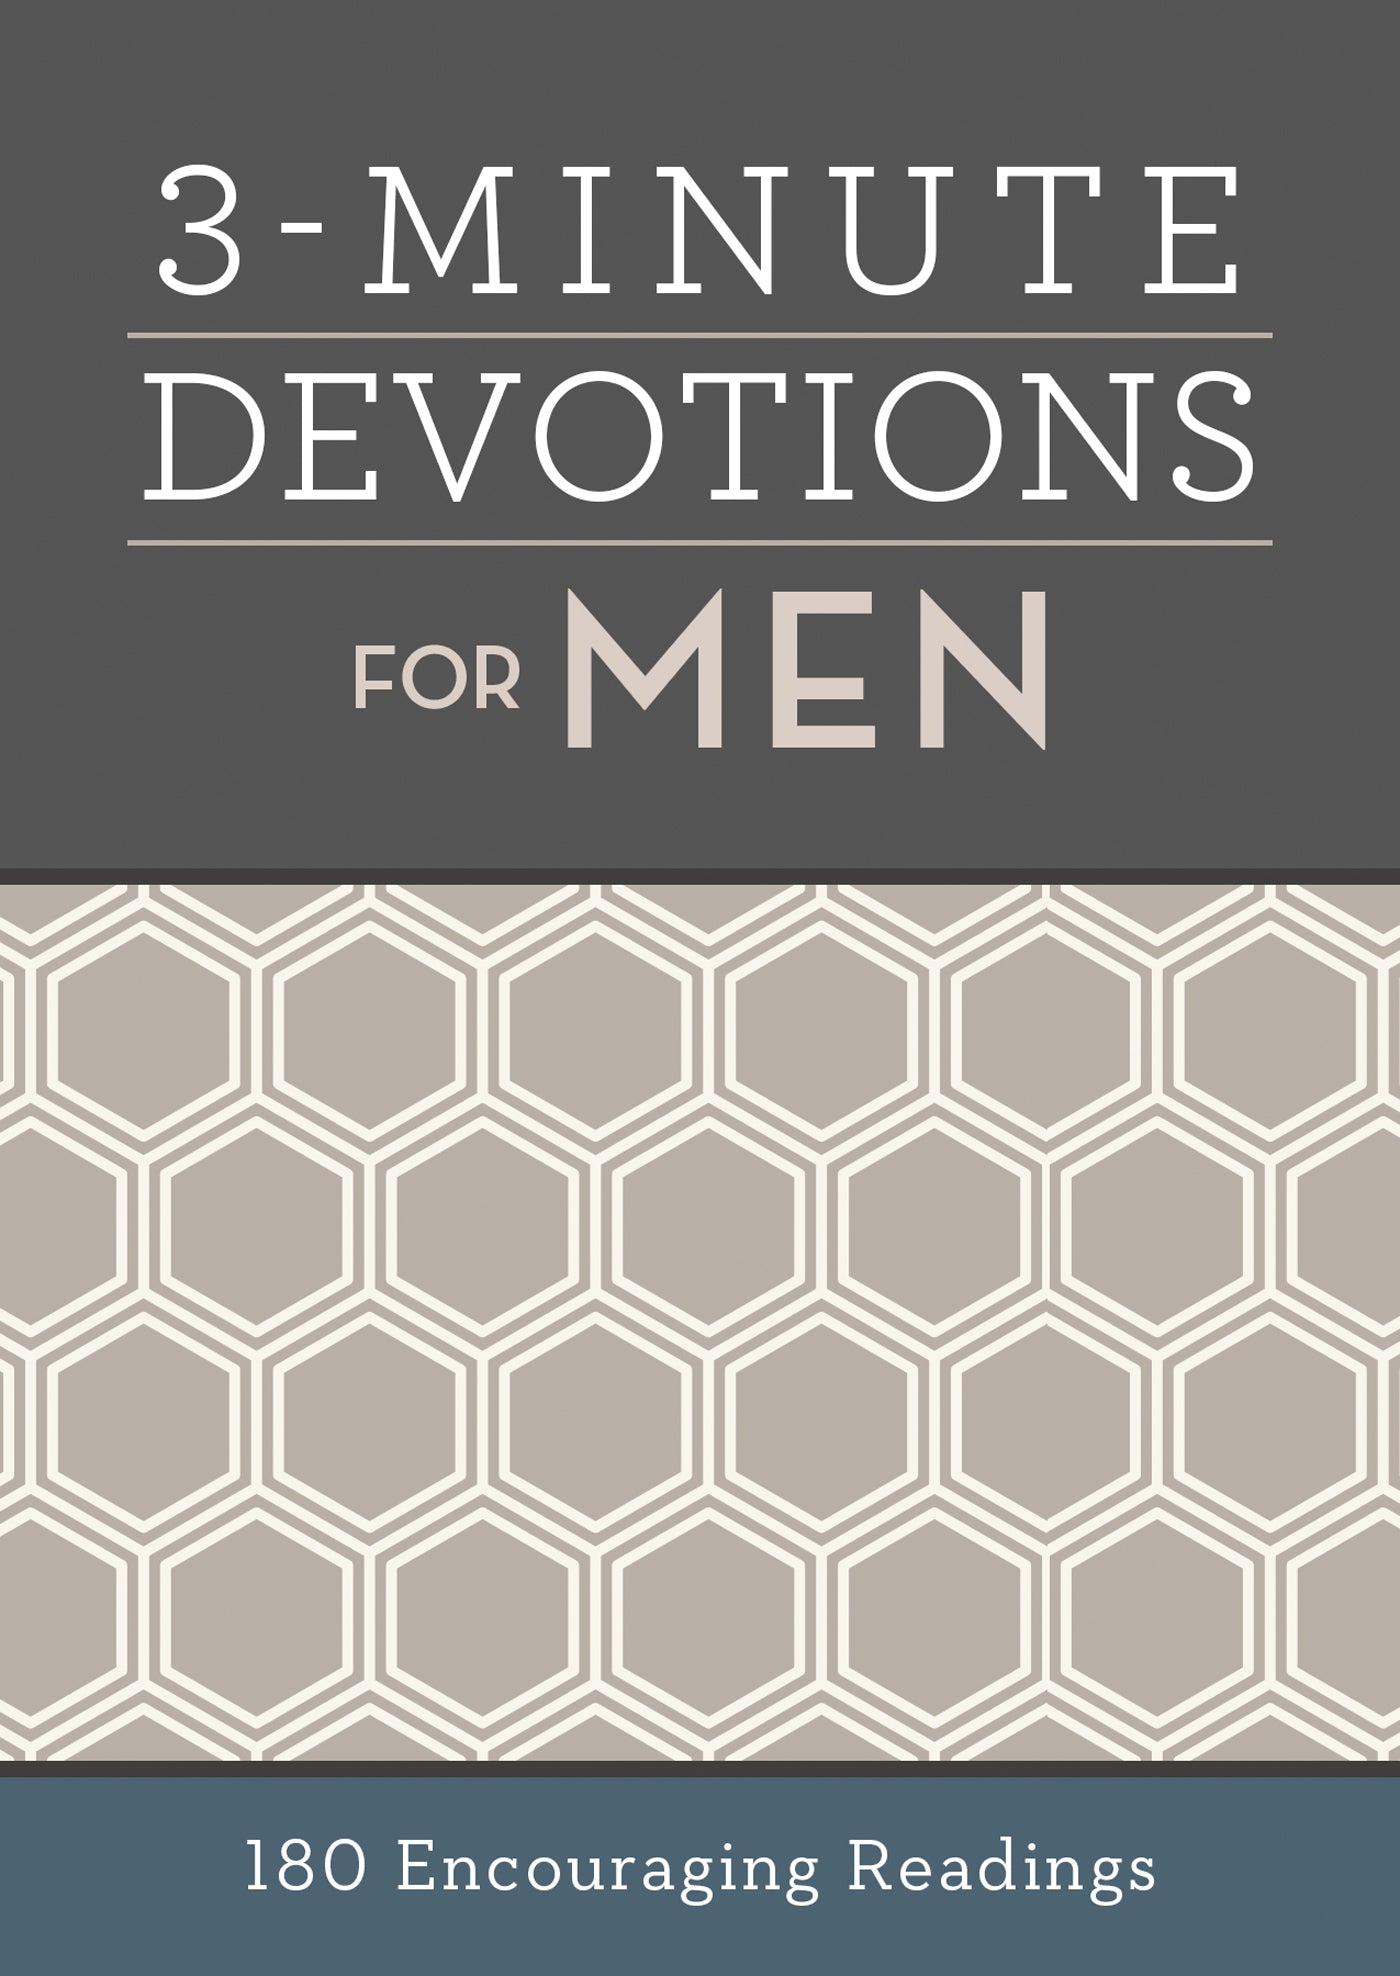 3-Minute Devotions for Men - The Christian Gift Company